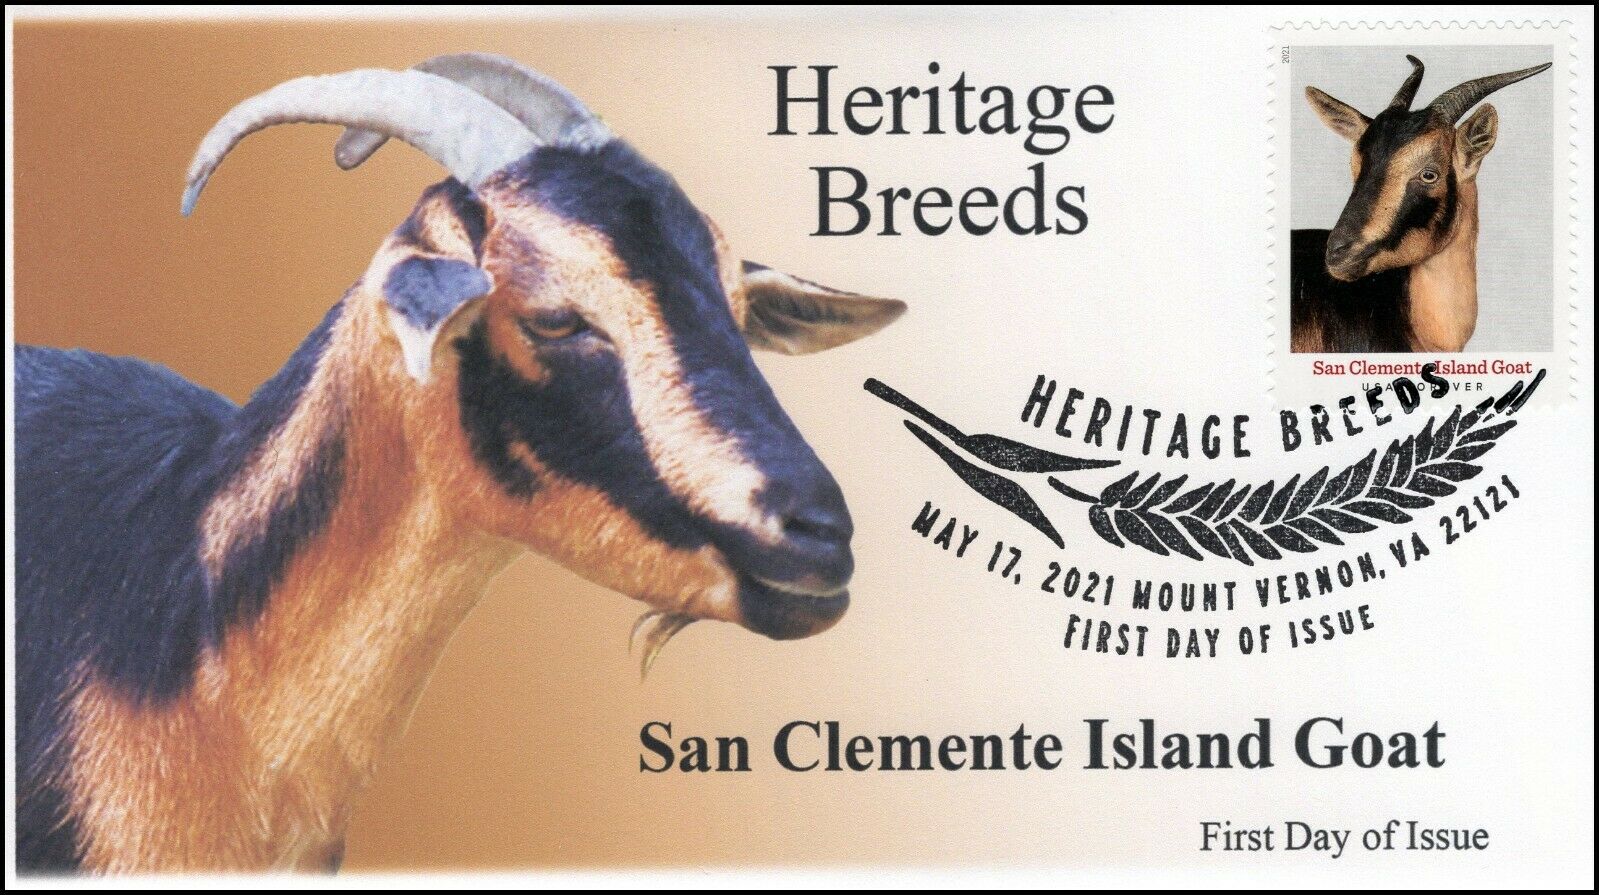 21-153, 2021, Heritage Breeds, First Day Cover, Pictorial Postmark, San Clemente